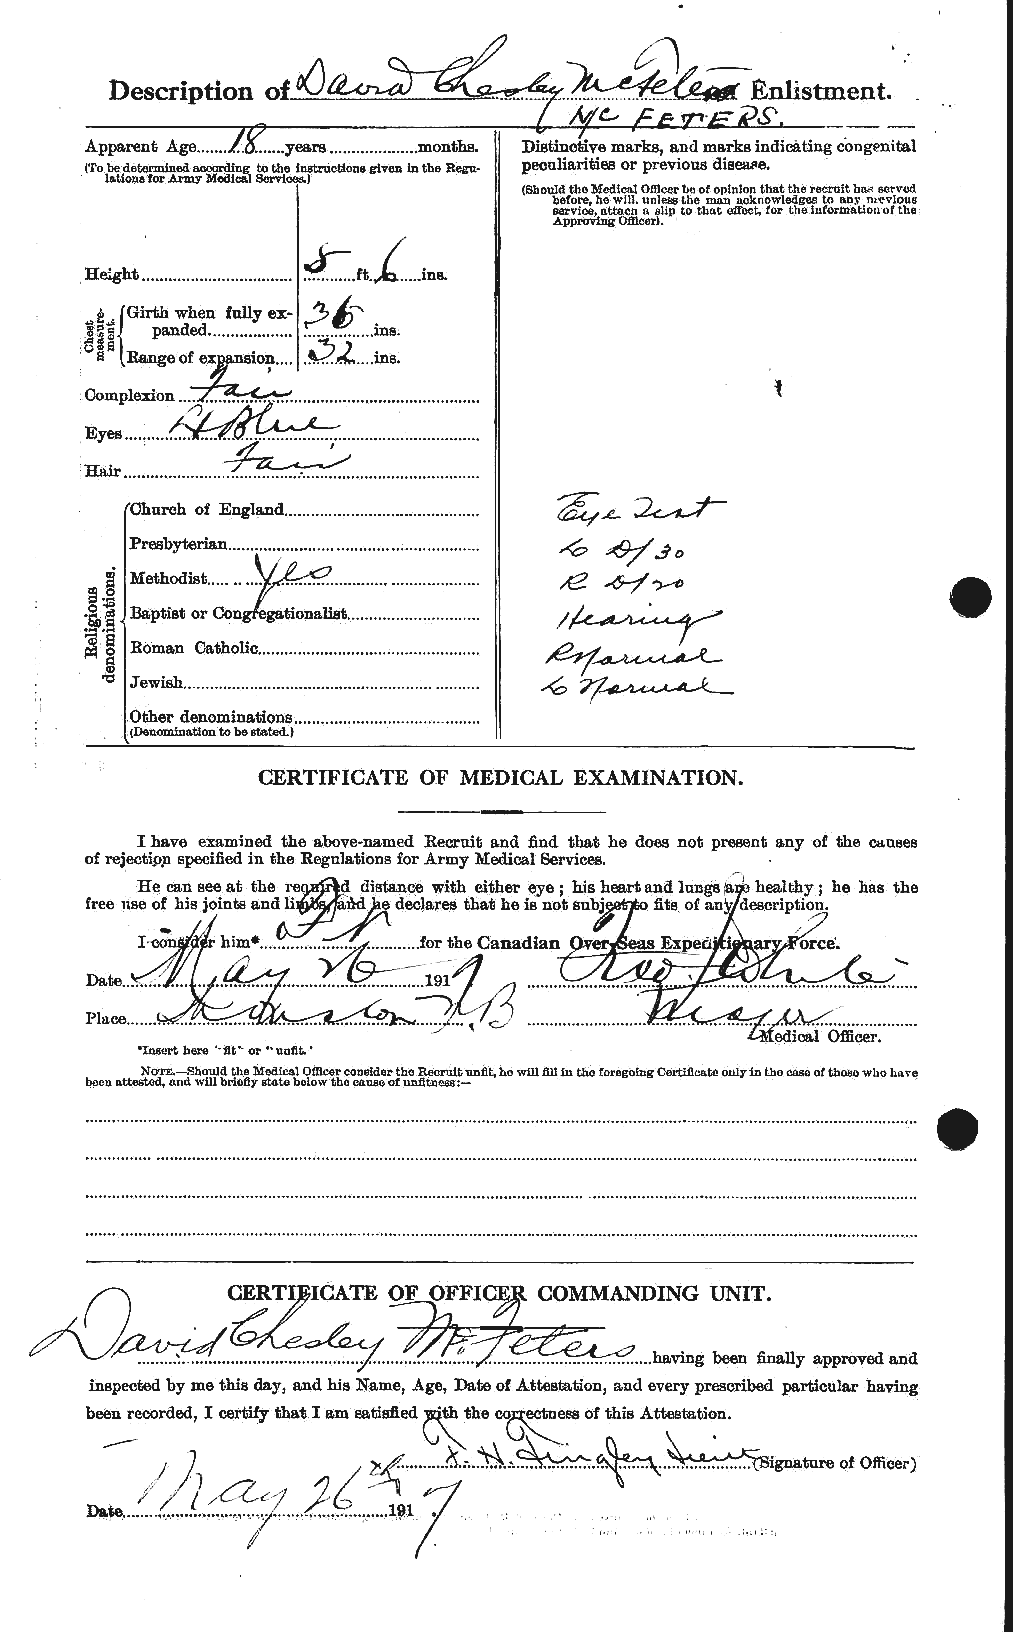 Personnel Records of the First World War - CEF 522619b